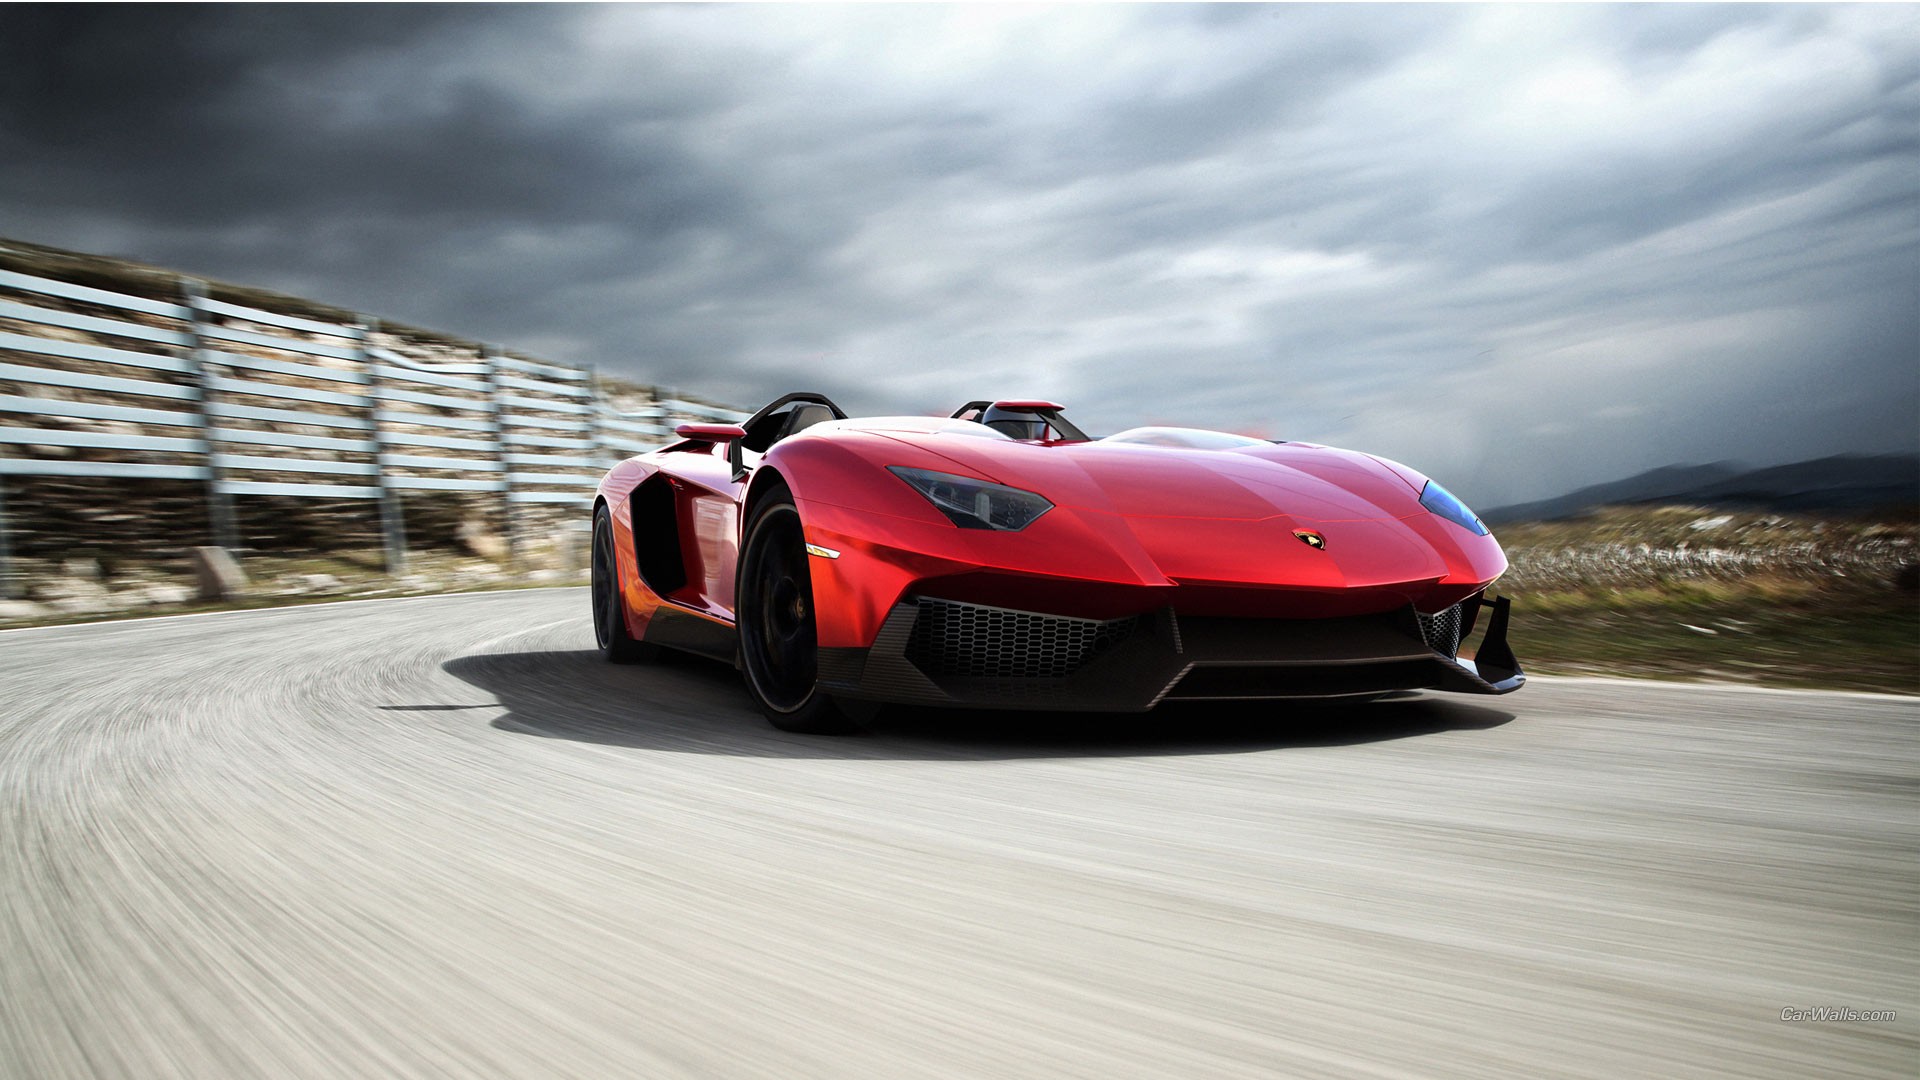 Lamborghini Aventador Lamborghini Aventador J Lamborghini Red Cars Vehicle 1920x1080